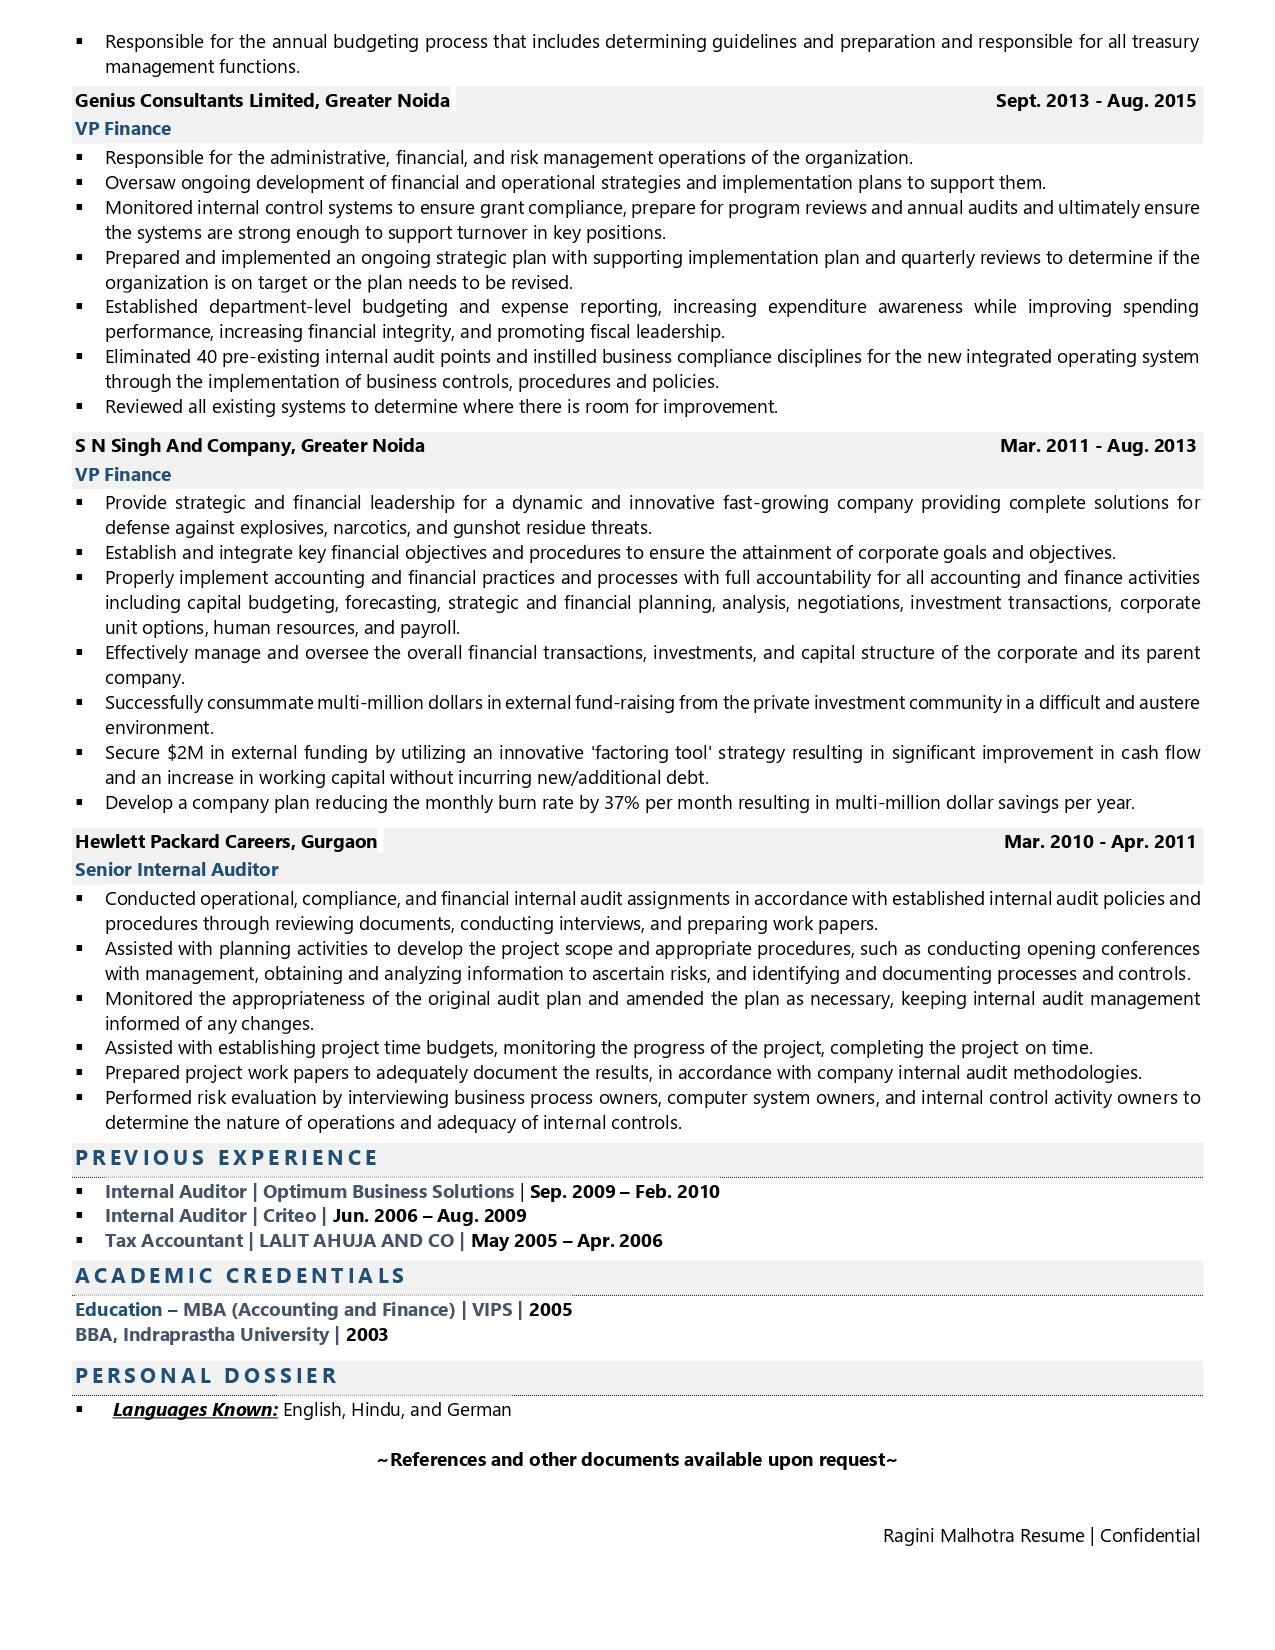 Chief Finance Officer - Resume Example & Template